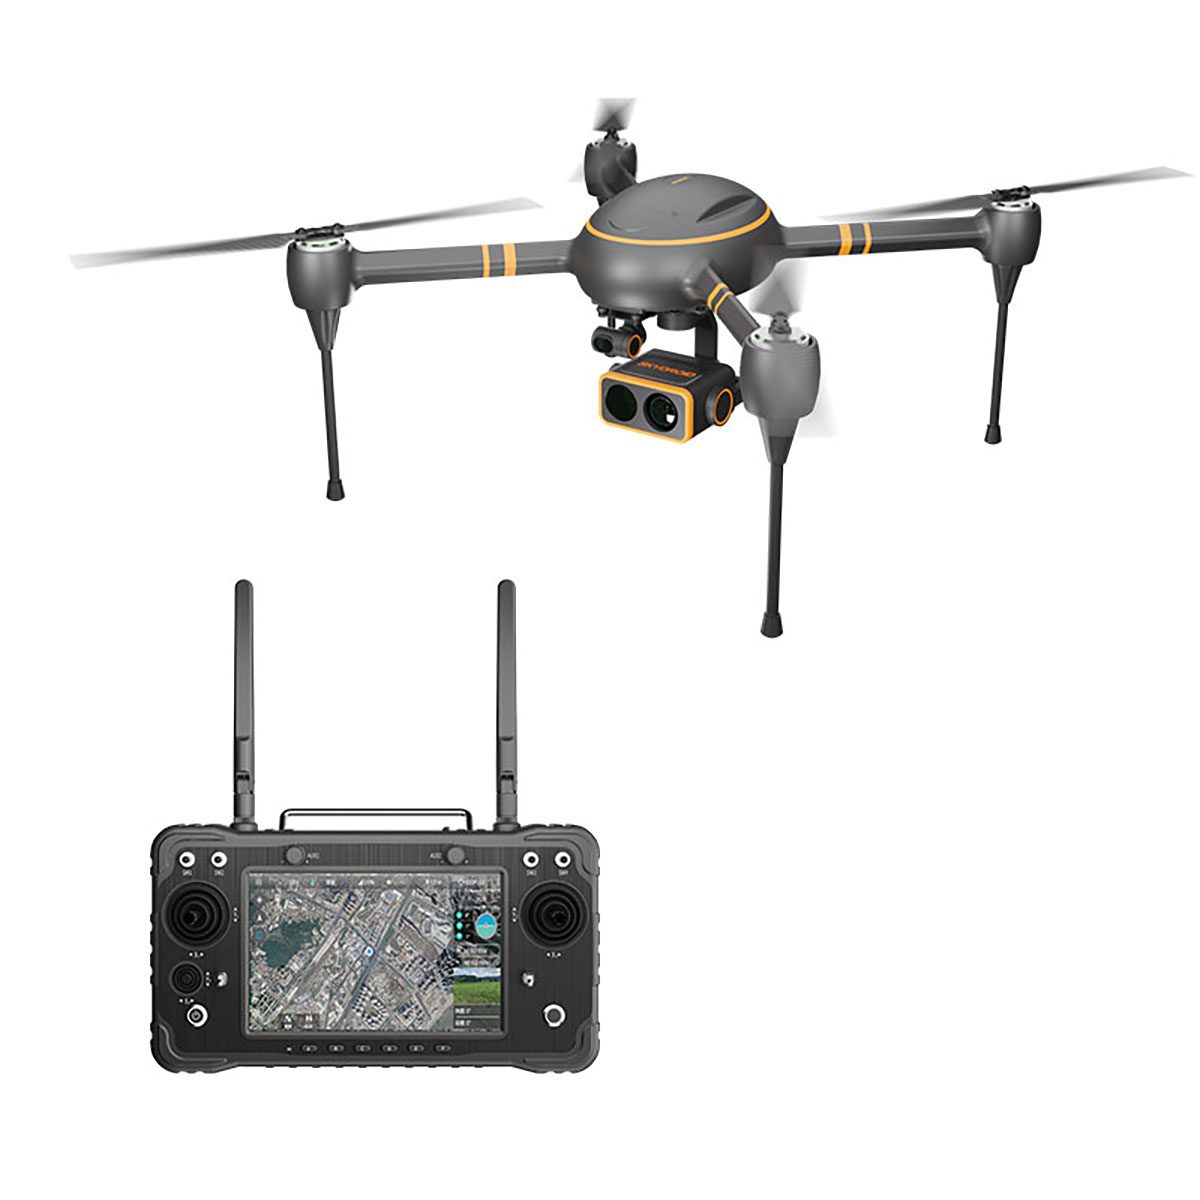 Skydroid MX680 flight platform for diverse applications and improved aerial operations.